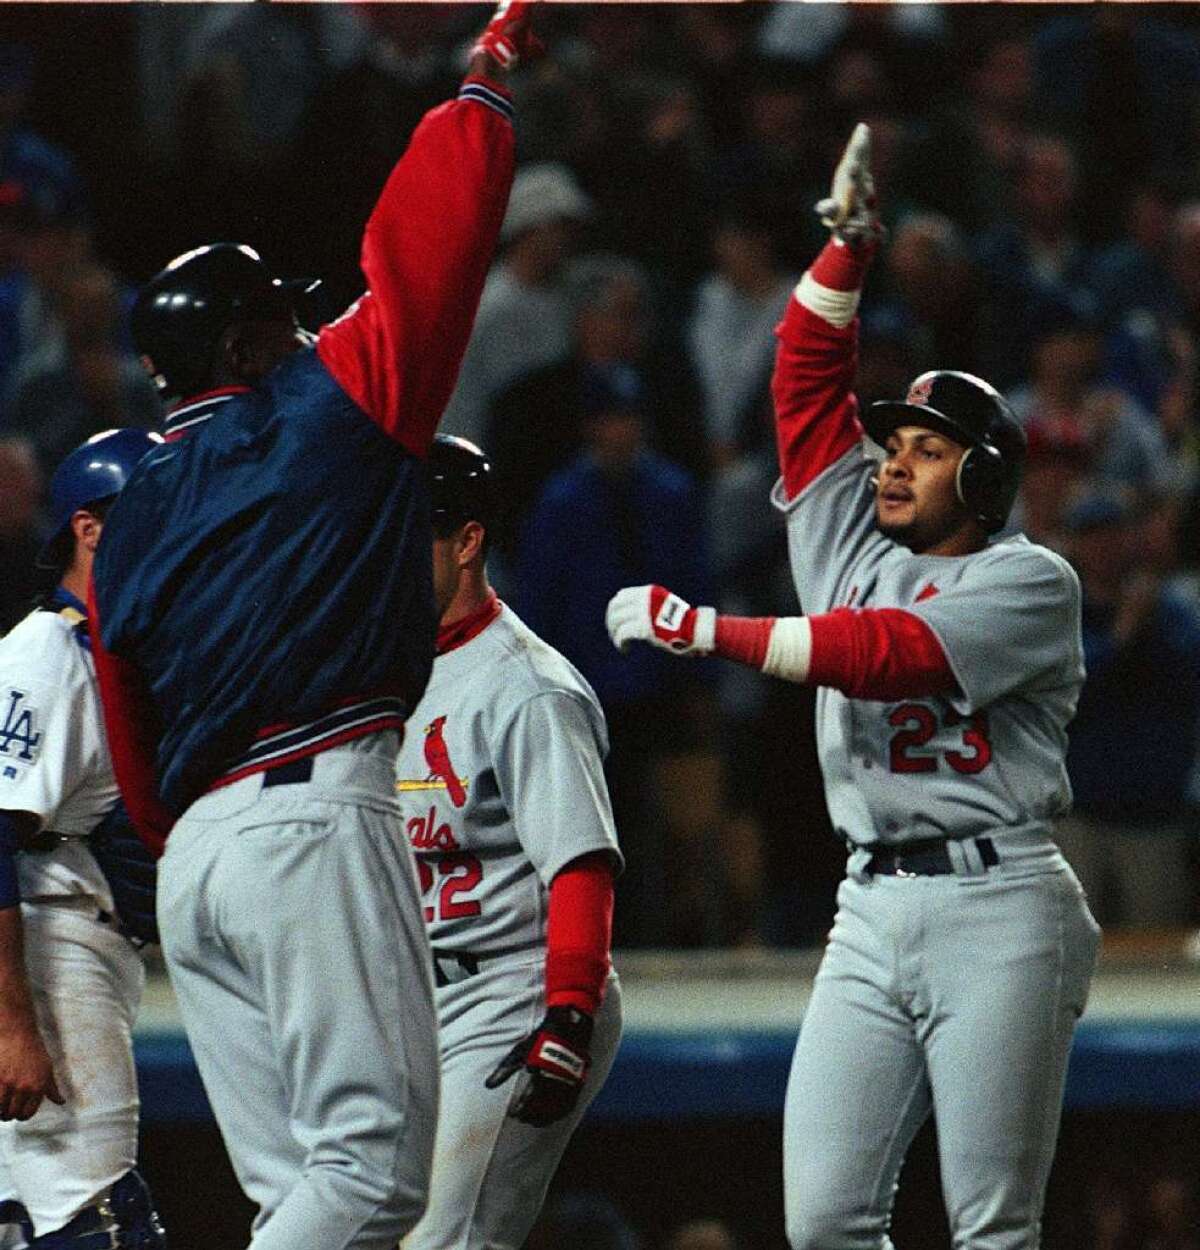 Fernando Tatis, right, is greeted at home plate after hitting his second grand slam in the same inning off of Chan Ho Park on April 23, 1999.